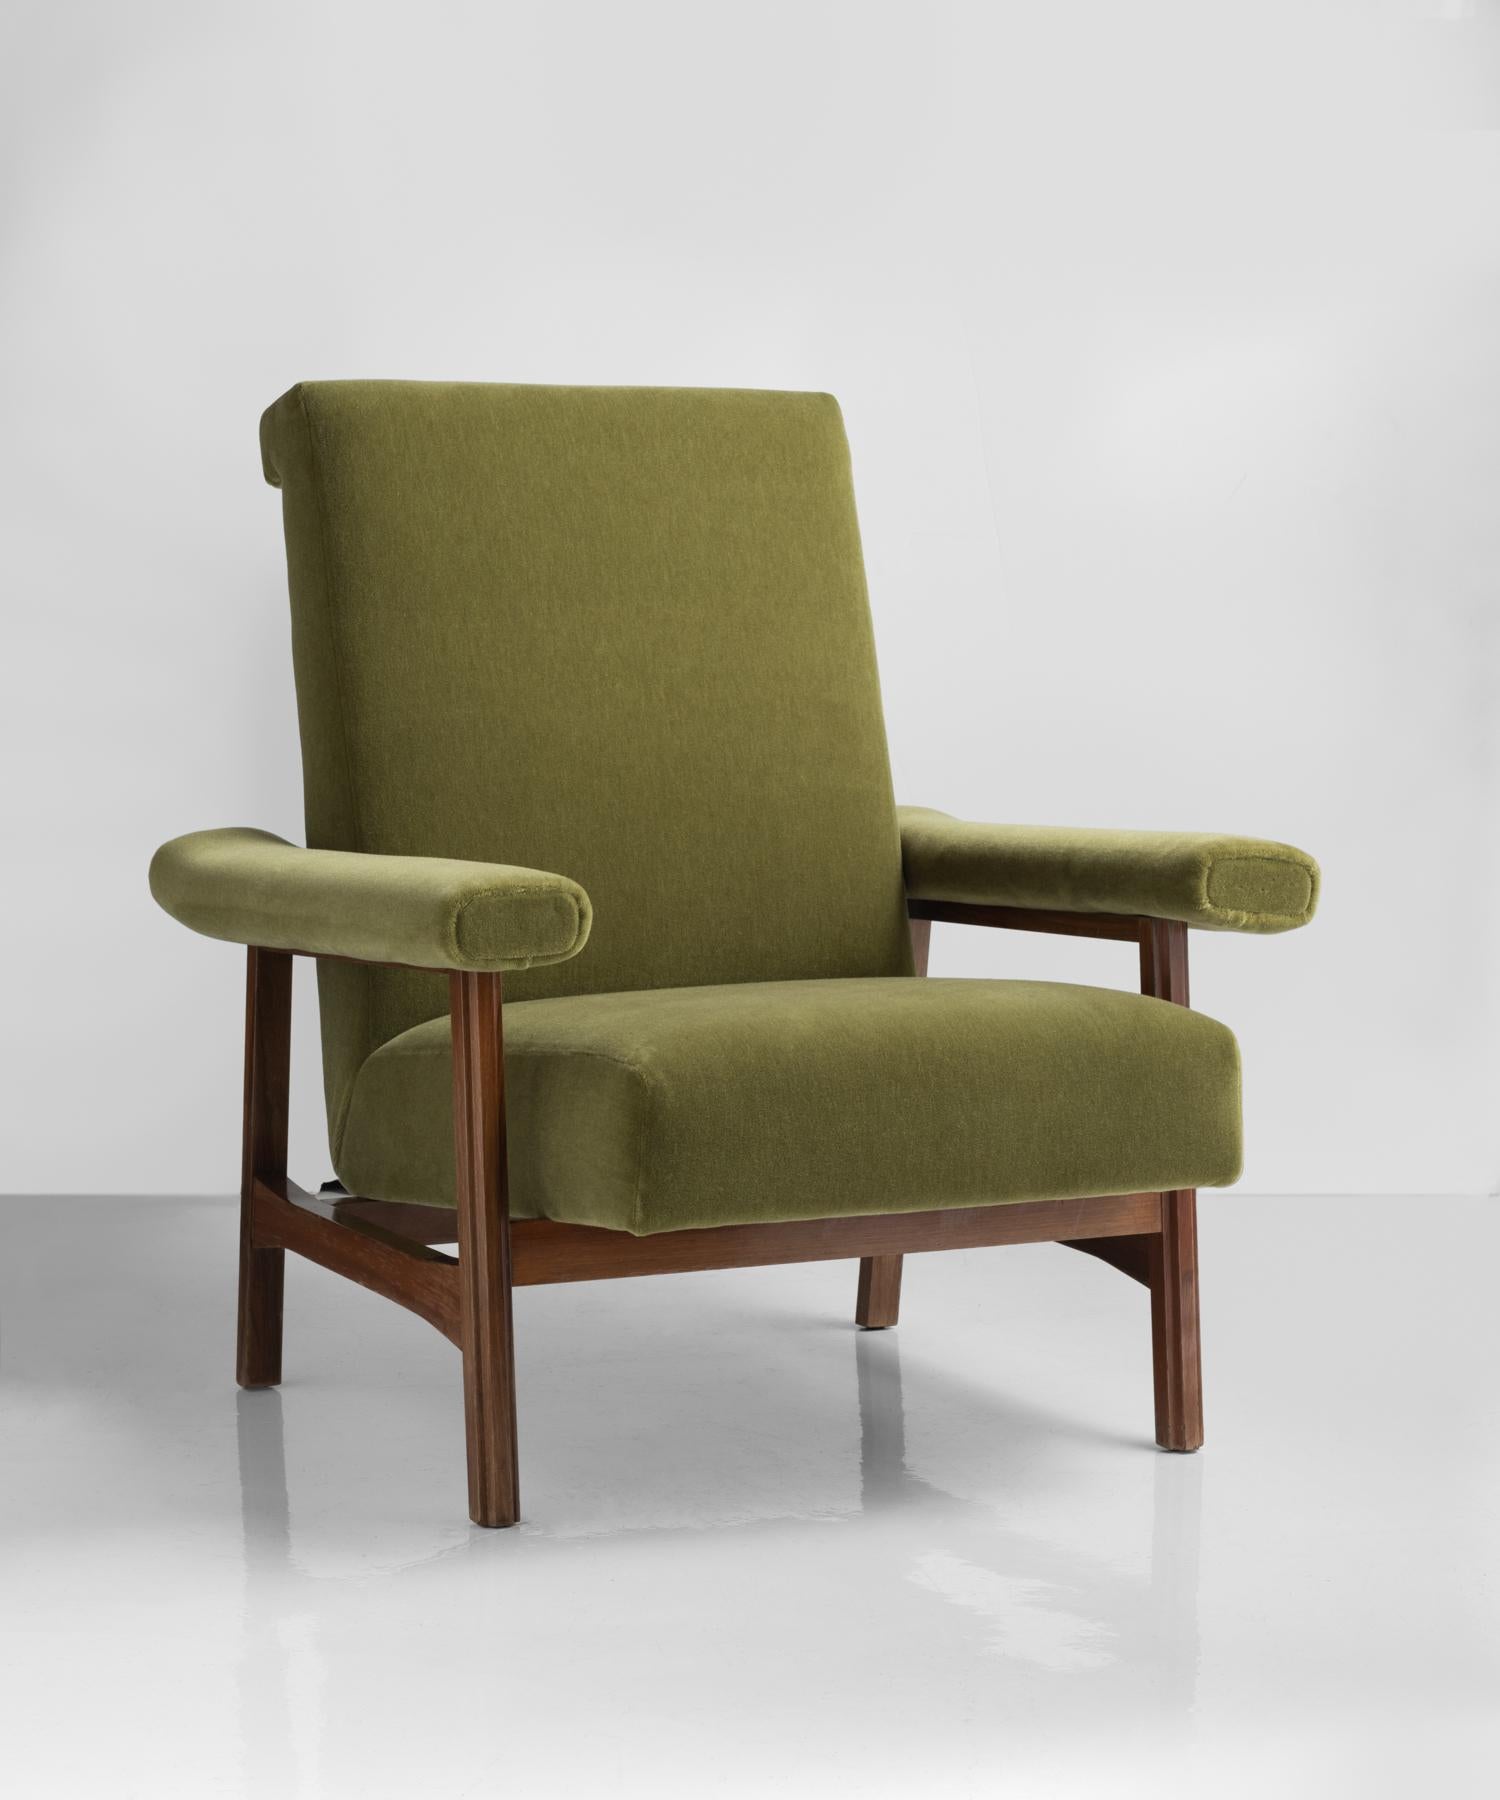 Modern mohair and teak armchair, Italy, circa 1960.

Newly upholstered form in Maharam olive green mohair on original teak base.